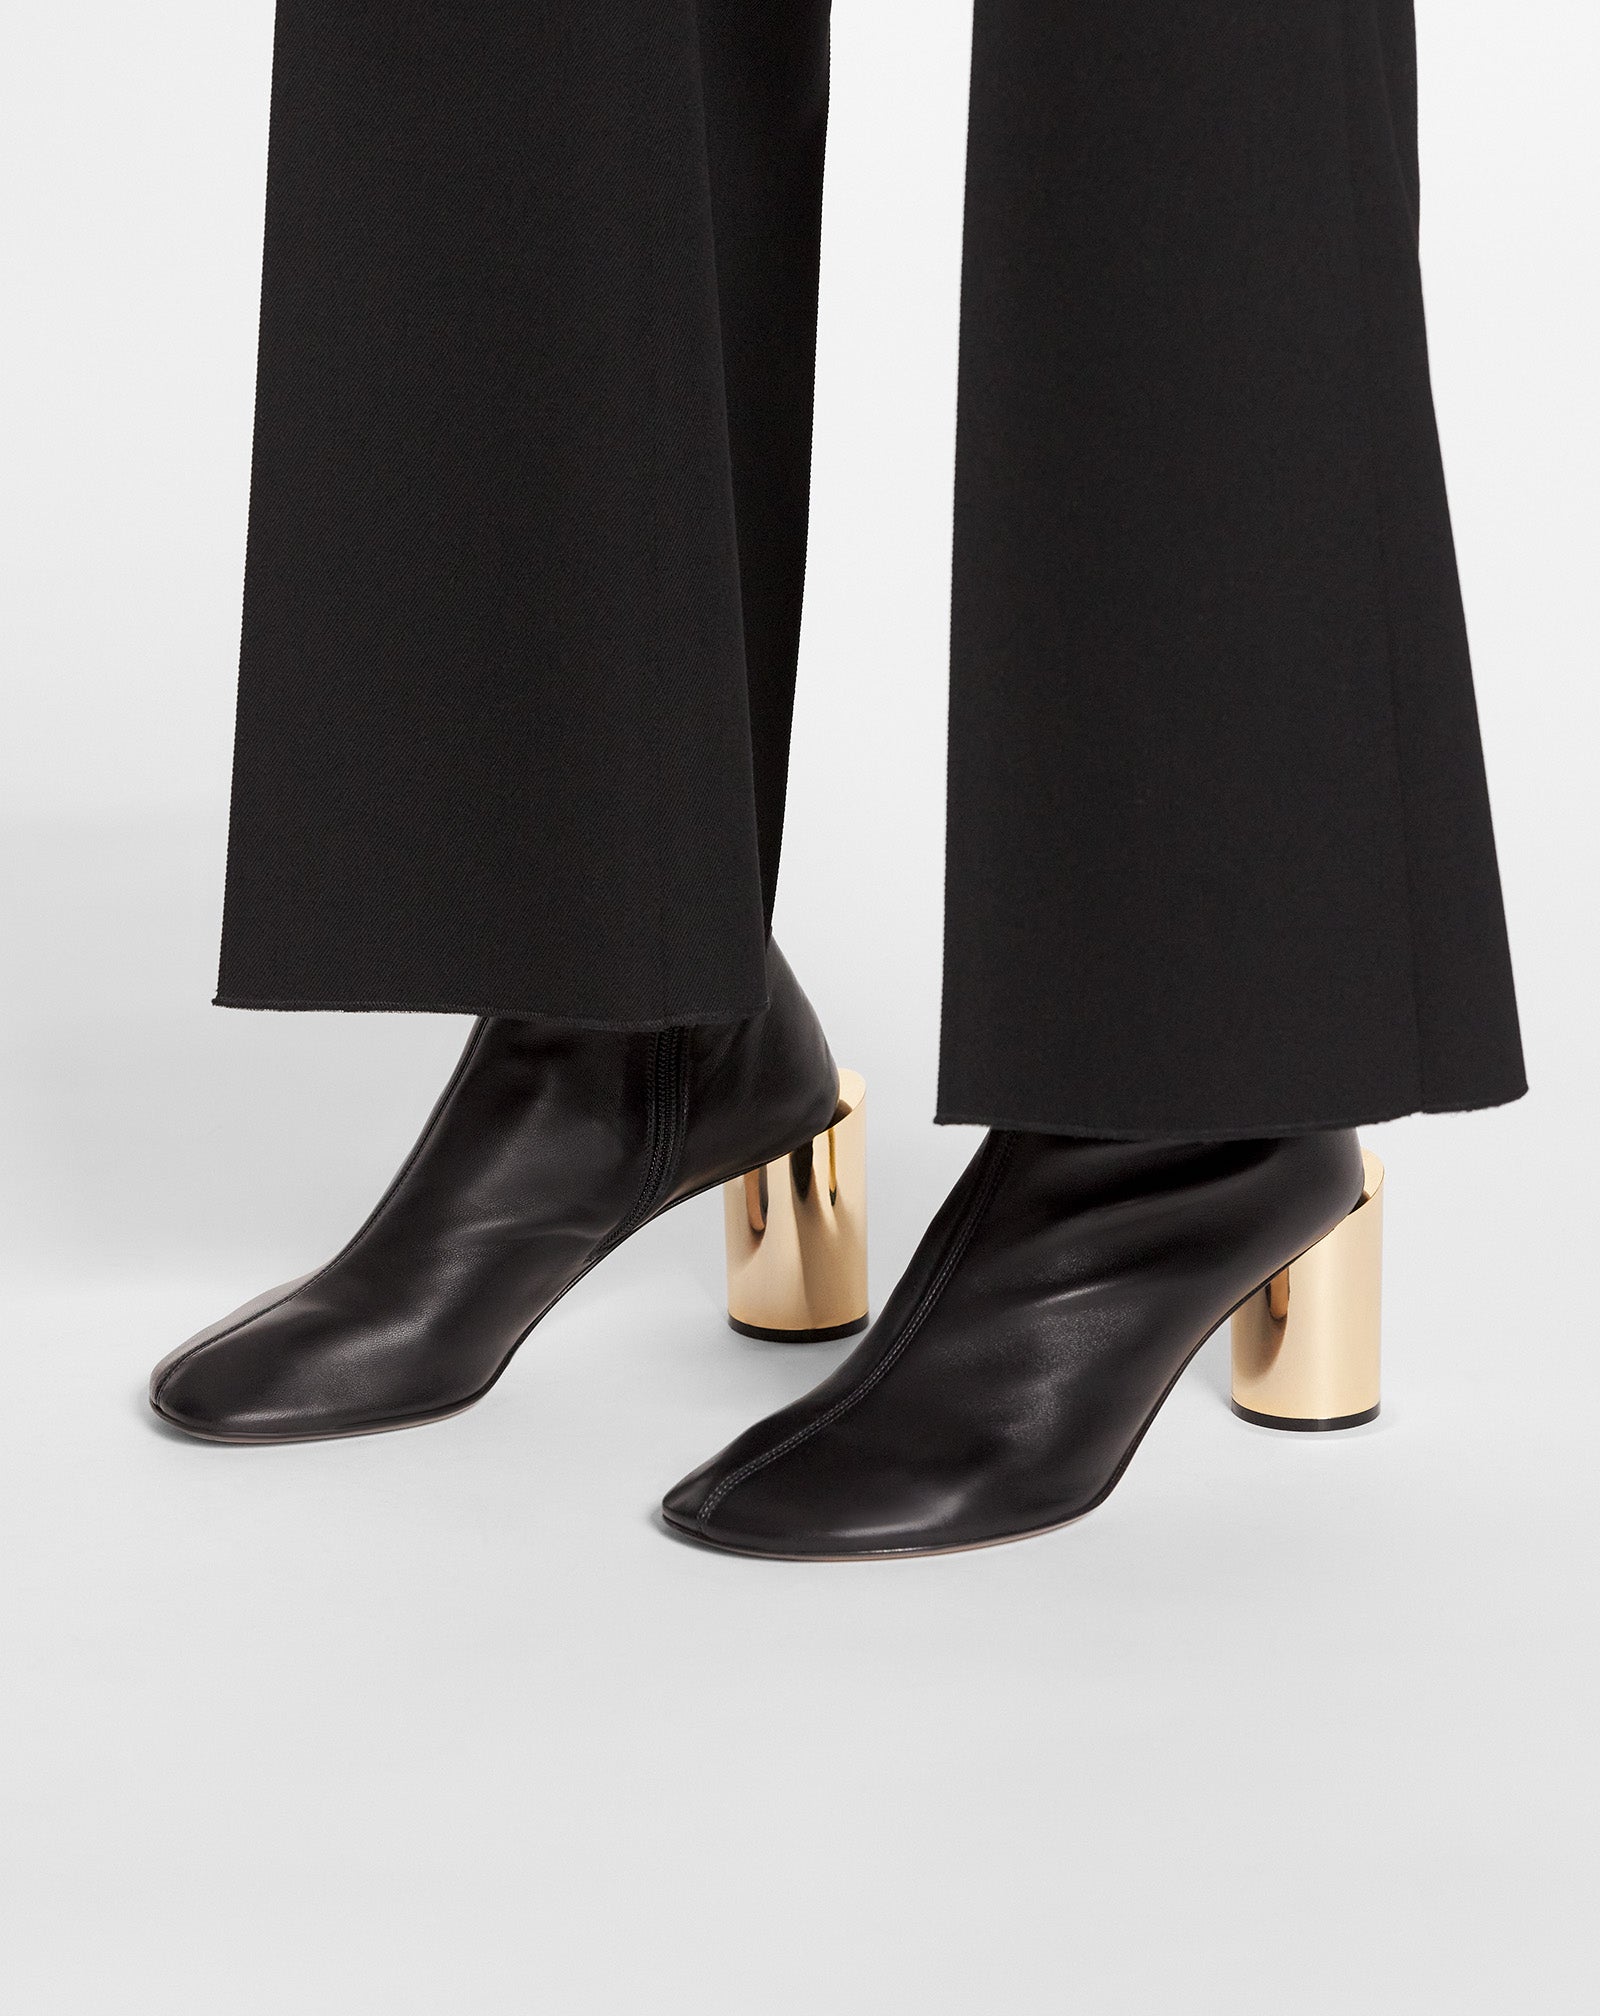 LEATHER SEQUENCE BY LANVIN CHUNKY HEELED BOOTS